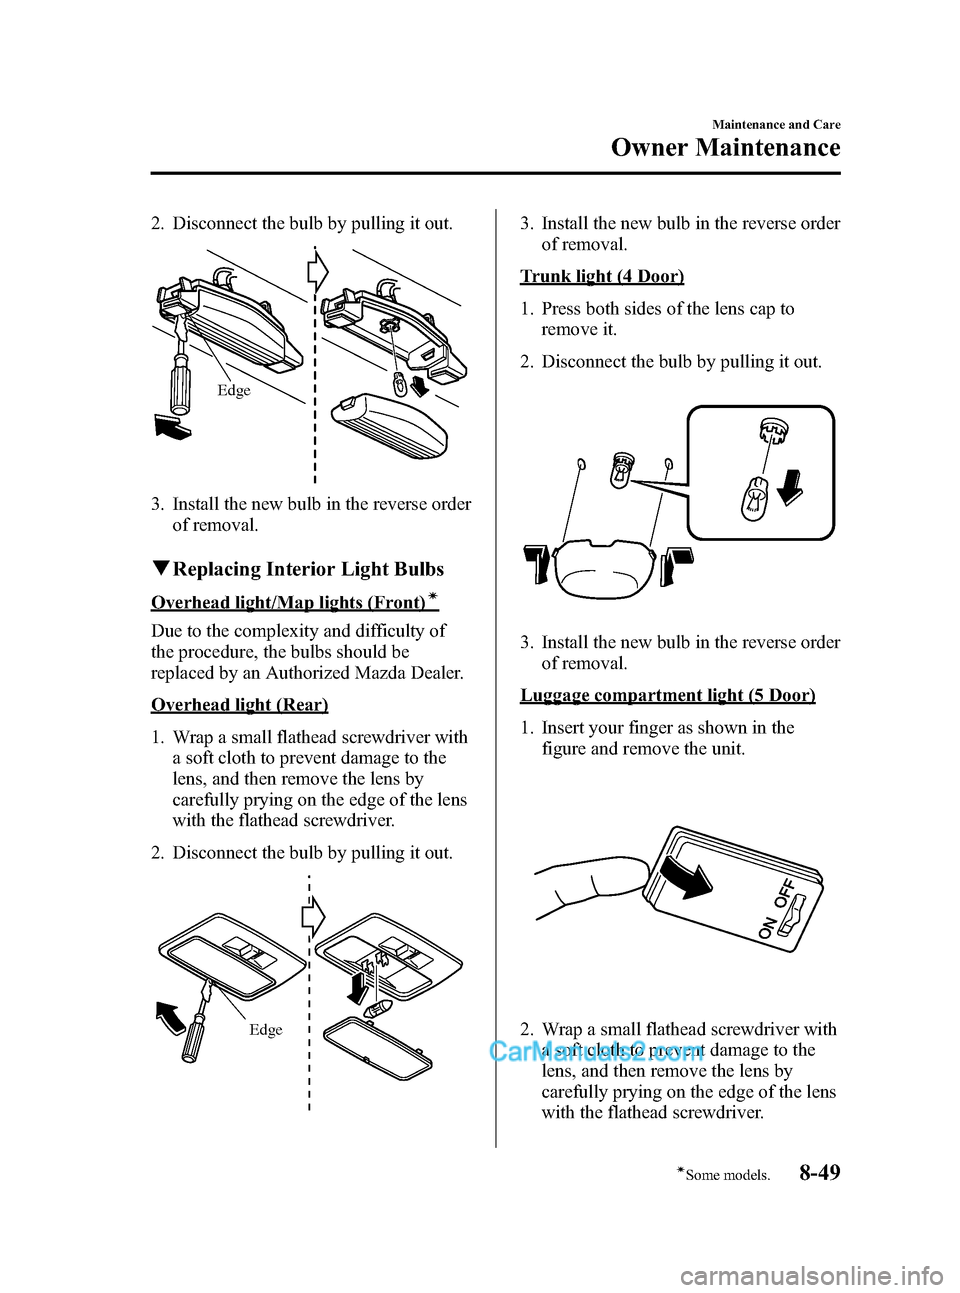 MAZDA MODEL MAZDASPEED 3 2008  Owners Manual (in English) Black plate (317,1)
2. Disconnect the bulb by pulling it out.
Edge
3. Install the new bulb in the reverse order
of removal.
qReplacing Interior Light Bulbs
Overhead light/Map lights (Front)í
Due to t